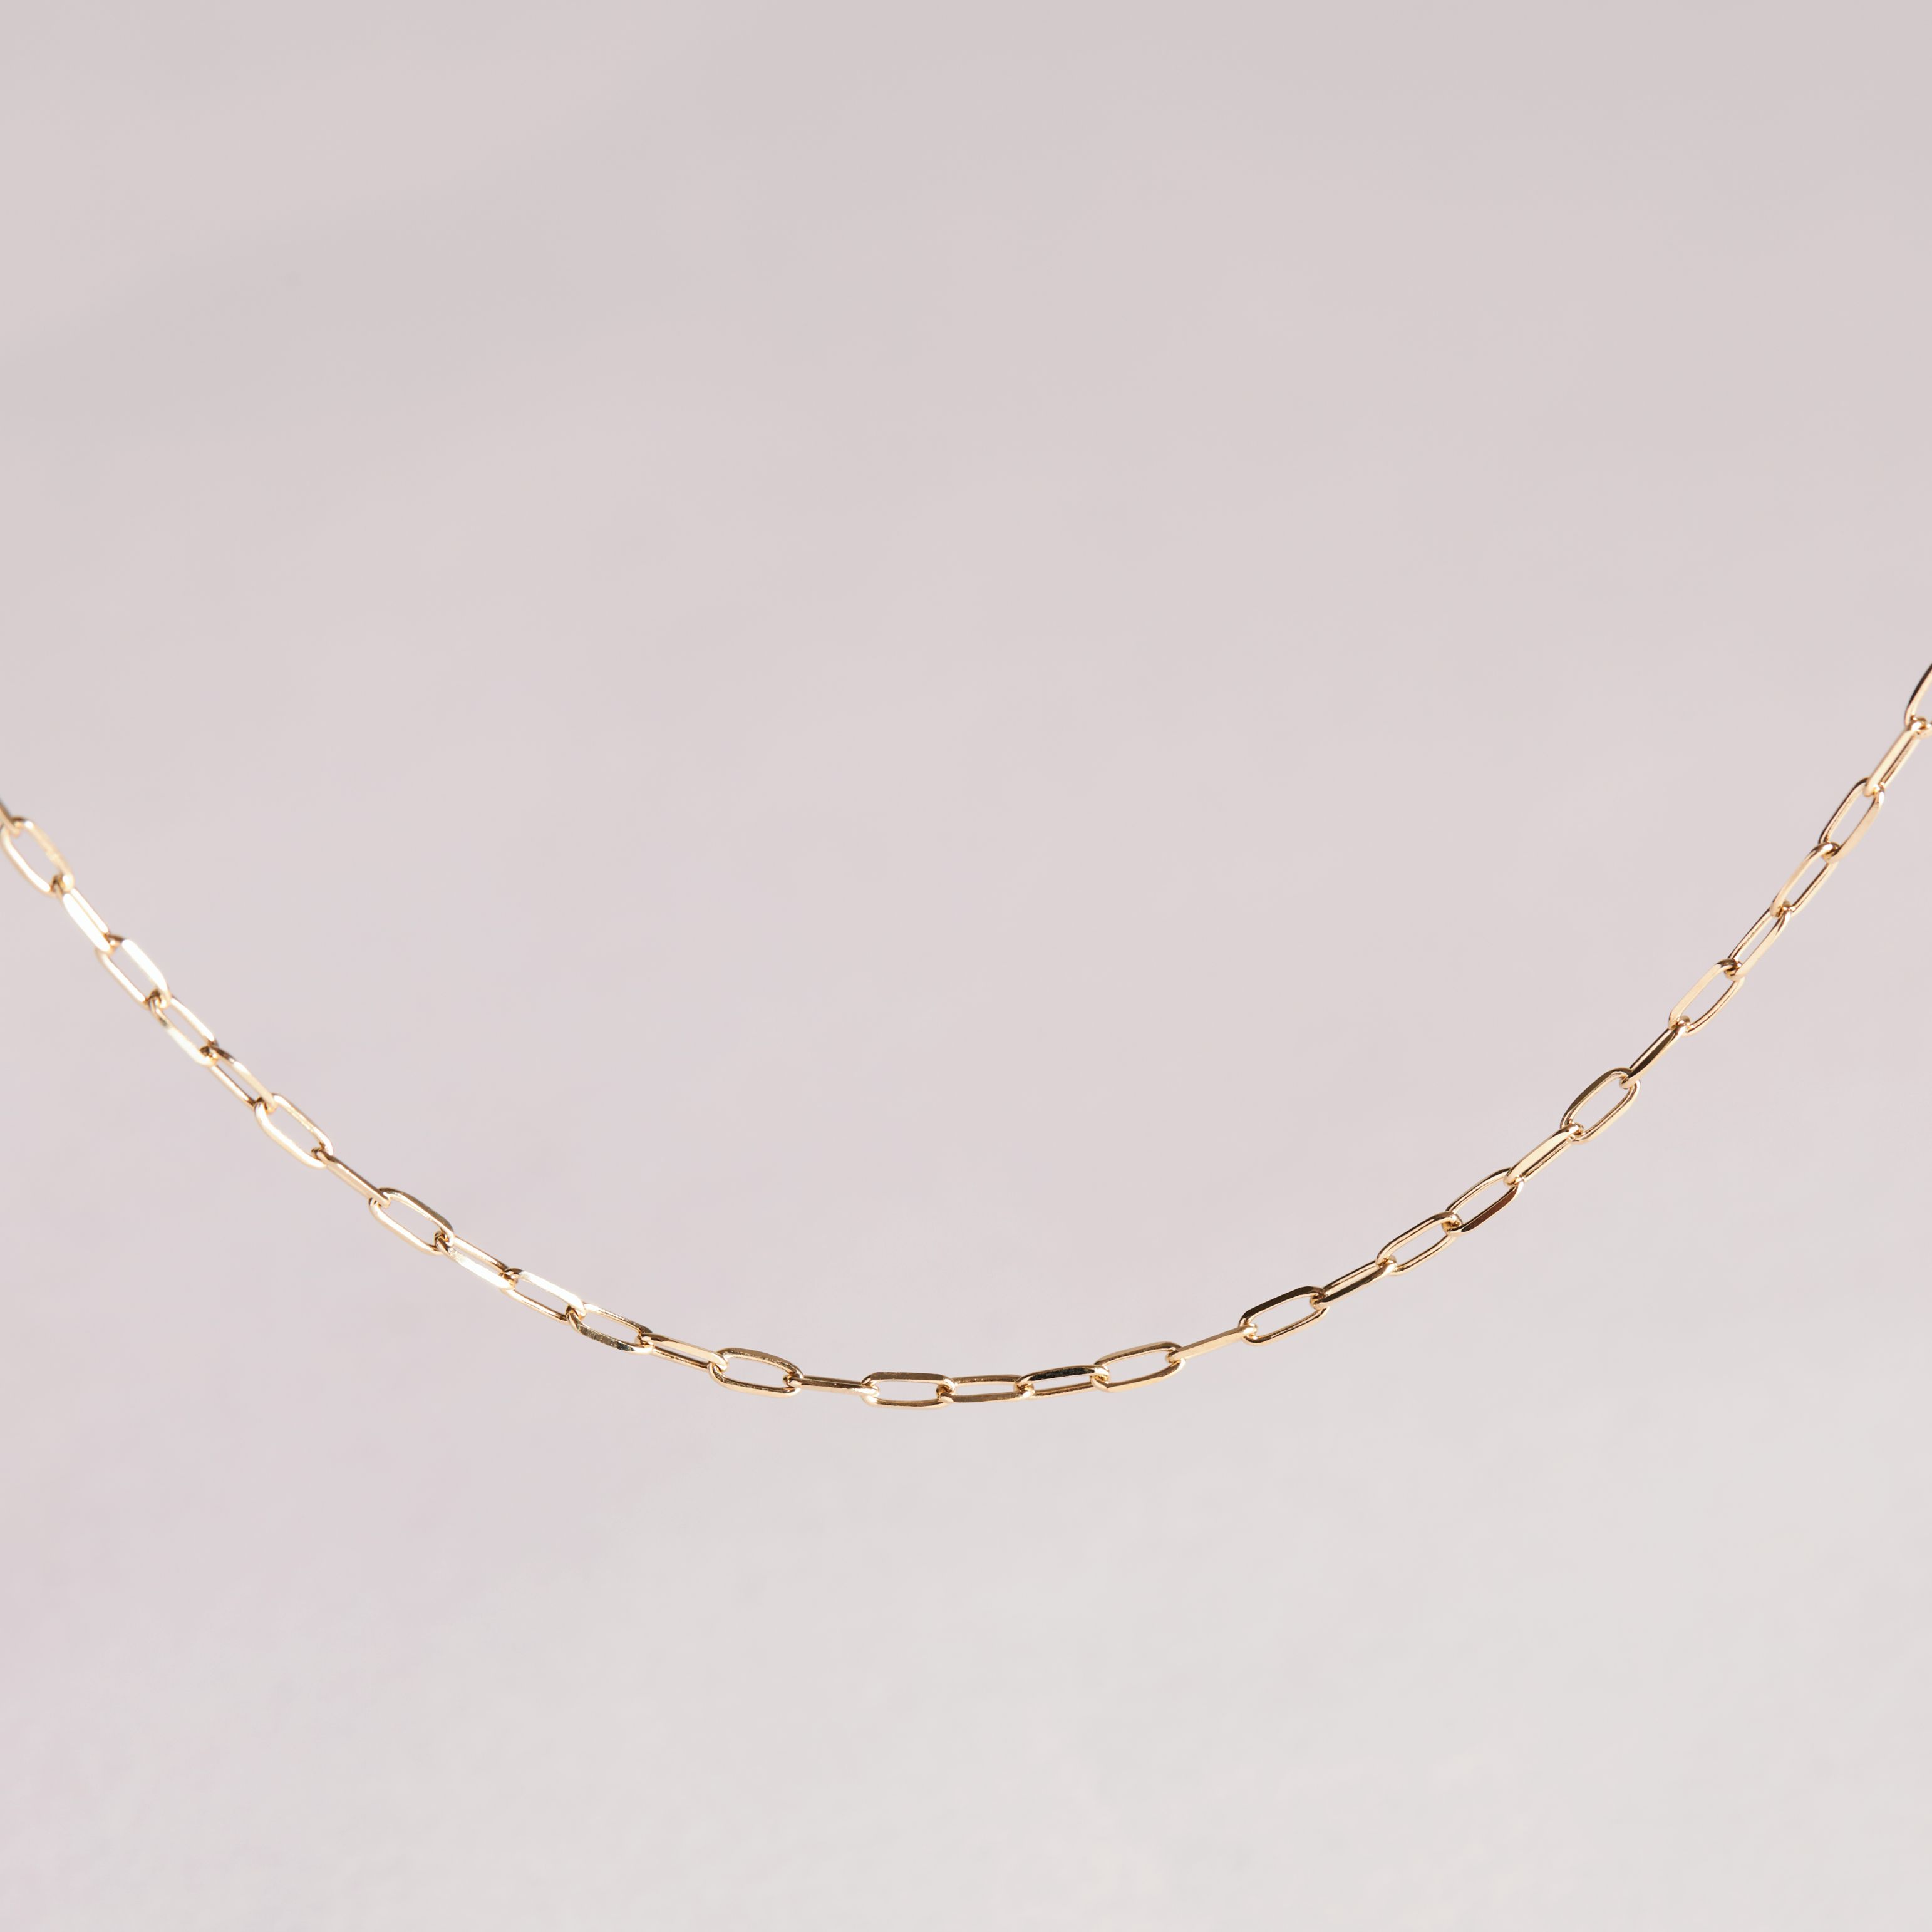 VENICE REAL GOLD EXTRA LONG CHAIN NECKLACE